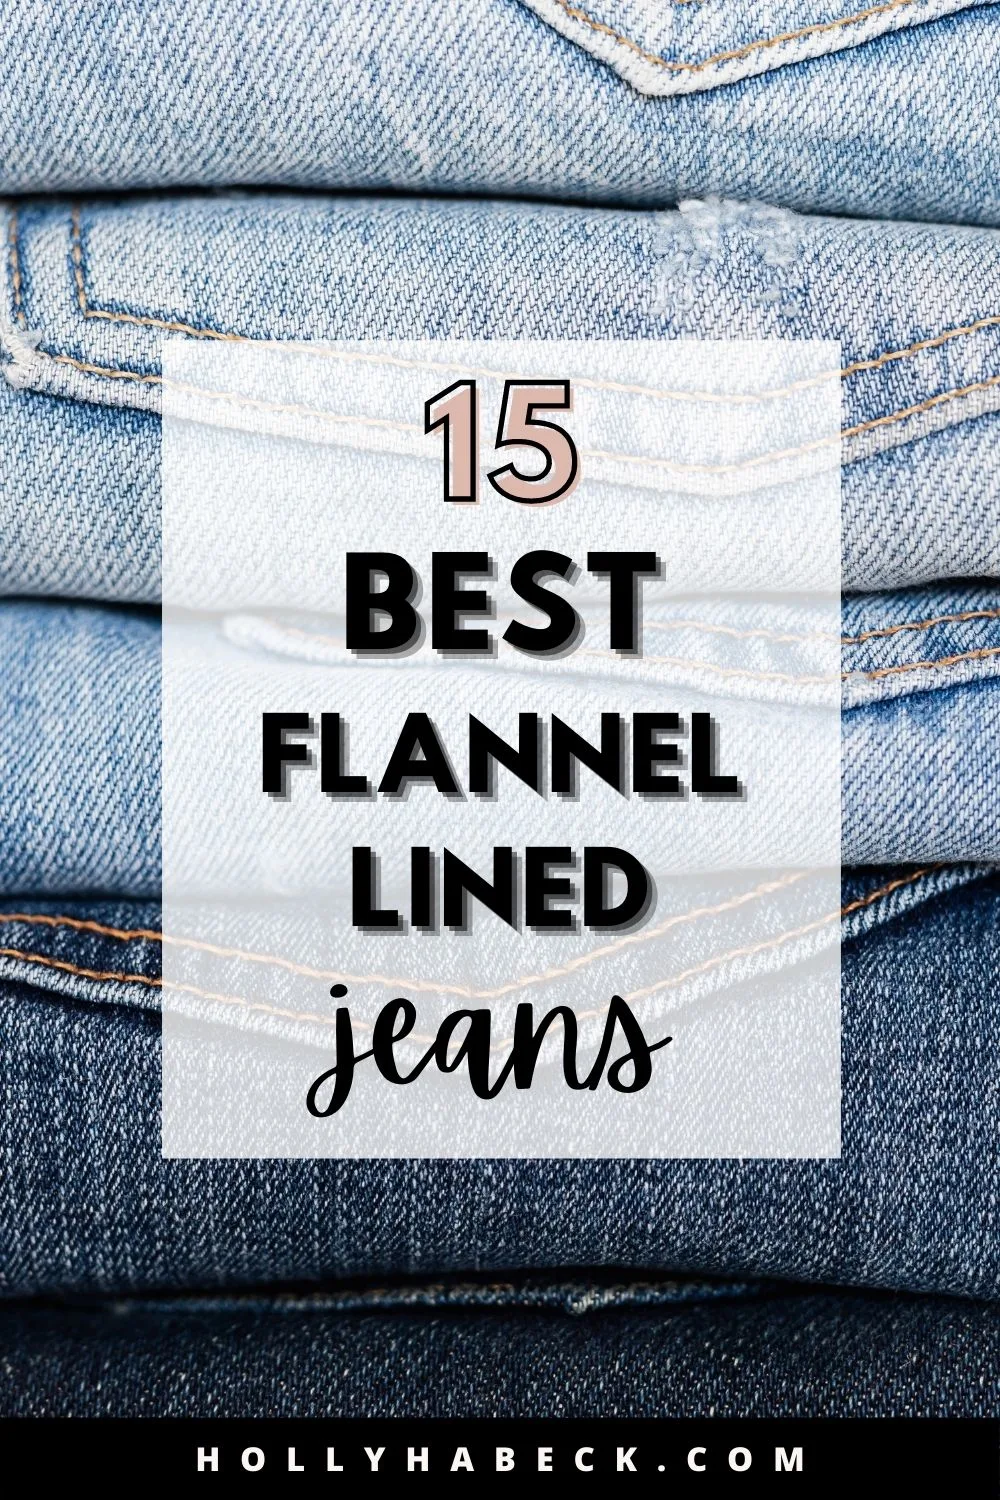 Flannel Lined — 15 Best Pairs to Keep You Warm - Holly Habeck